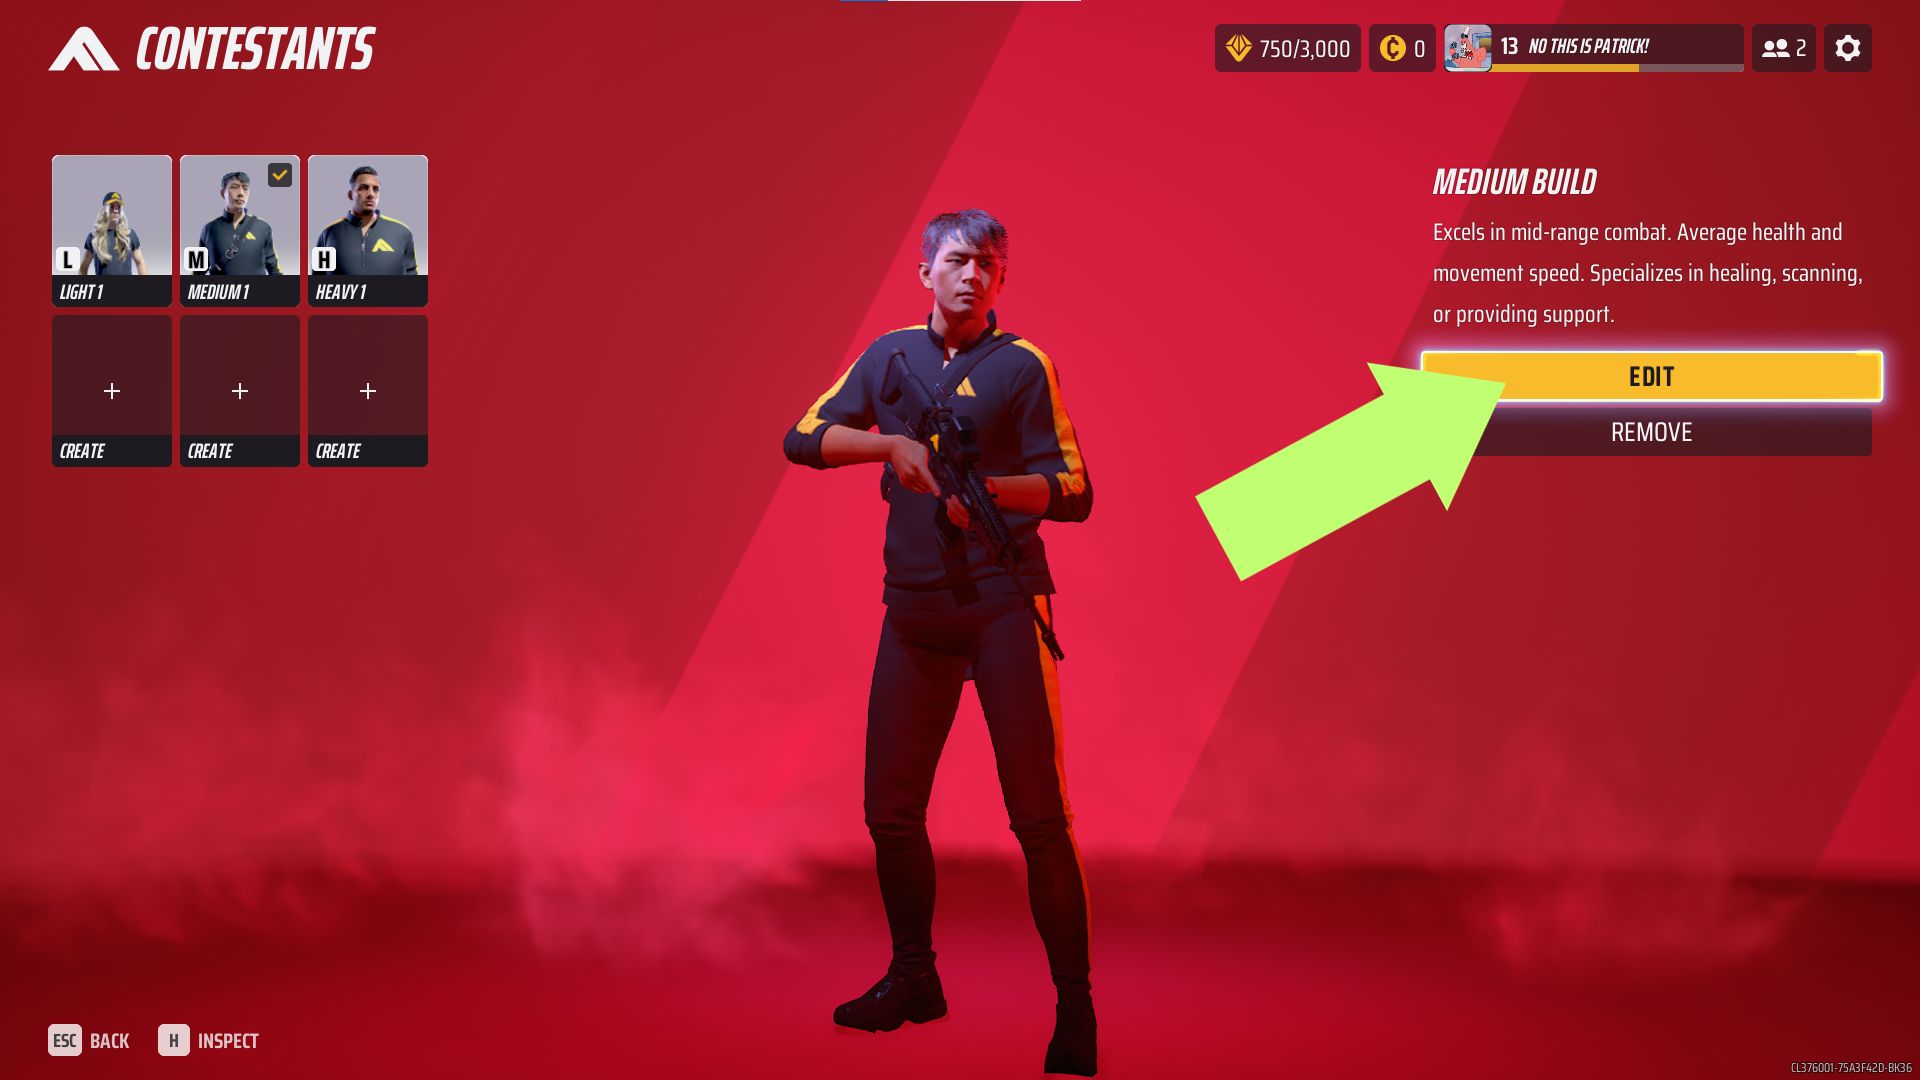 A screenshot of the Edit button in The Final's Contestant menu. 